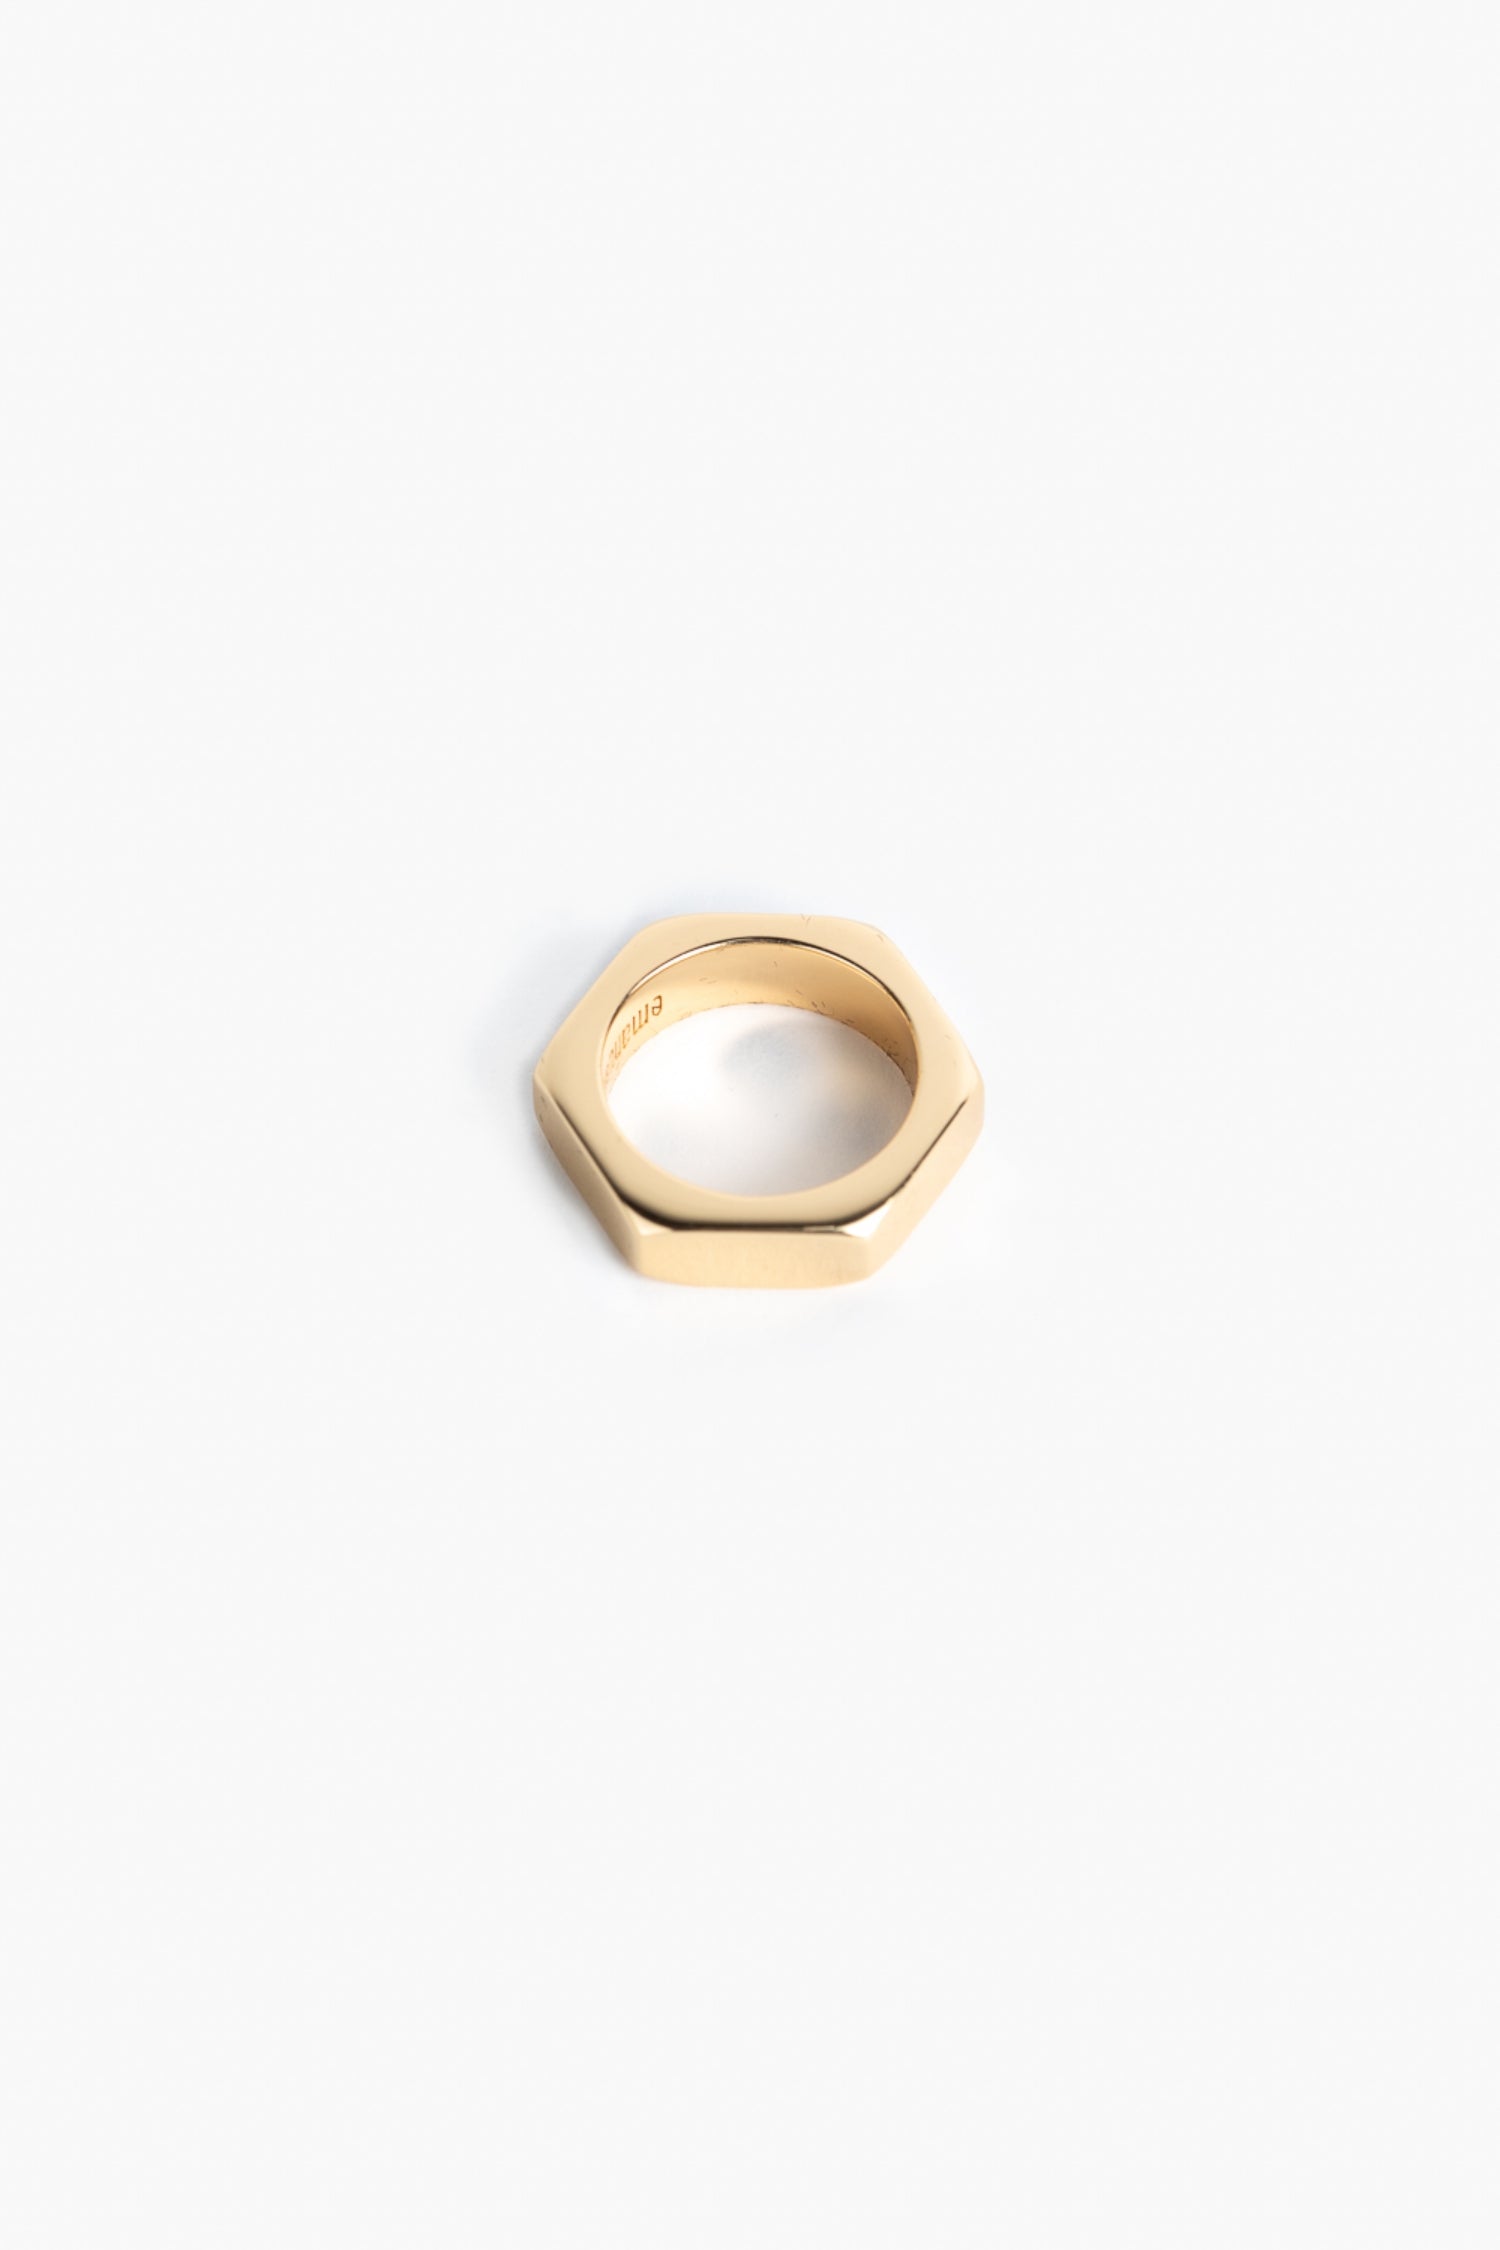 Handcrafted Bolt-Shape Ring 